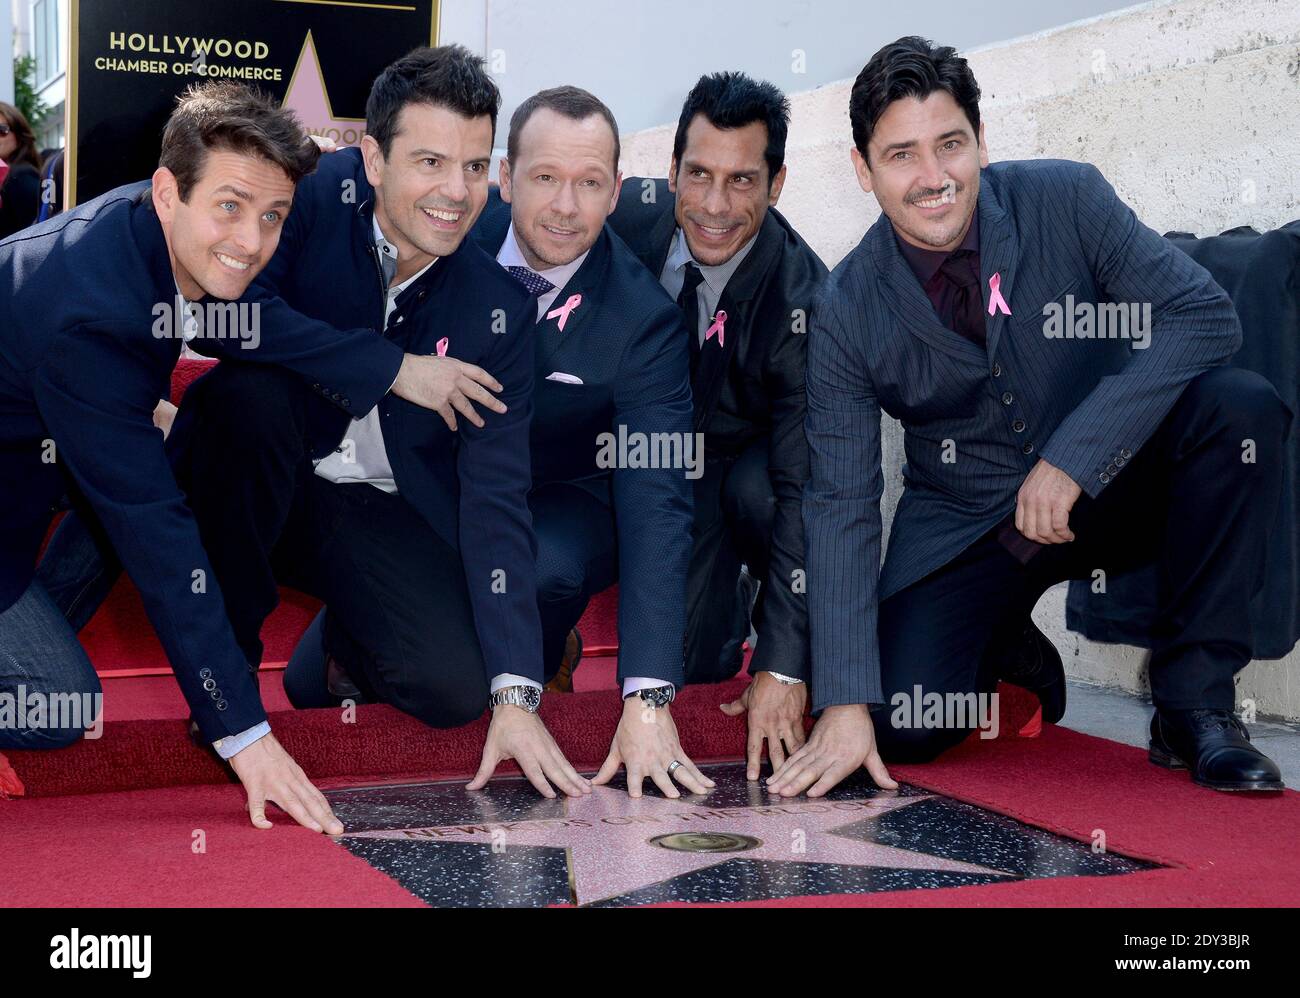 New Kids on The Block members Joey McIntyre, Jordan Knight, Donnie Wahlberg, Danny Wood and Jonathan Knight pose as they are honored with a star on the Hollywood Walk of Fame on October 9, 2014 in Hollywood, Los Angeles, CA, USA. The multi-platinum selling, award-winning musicial group received the 2,530th star in the category of Recording. Photo by Lionel Hahn/ABACAPRESS.COM Stock Photo